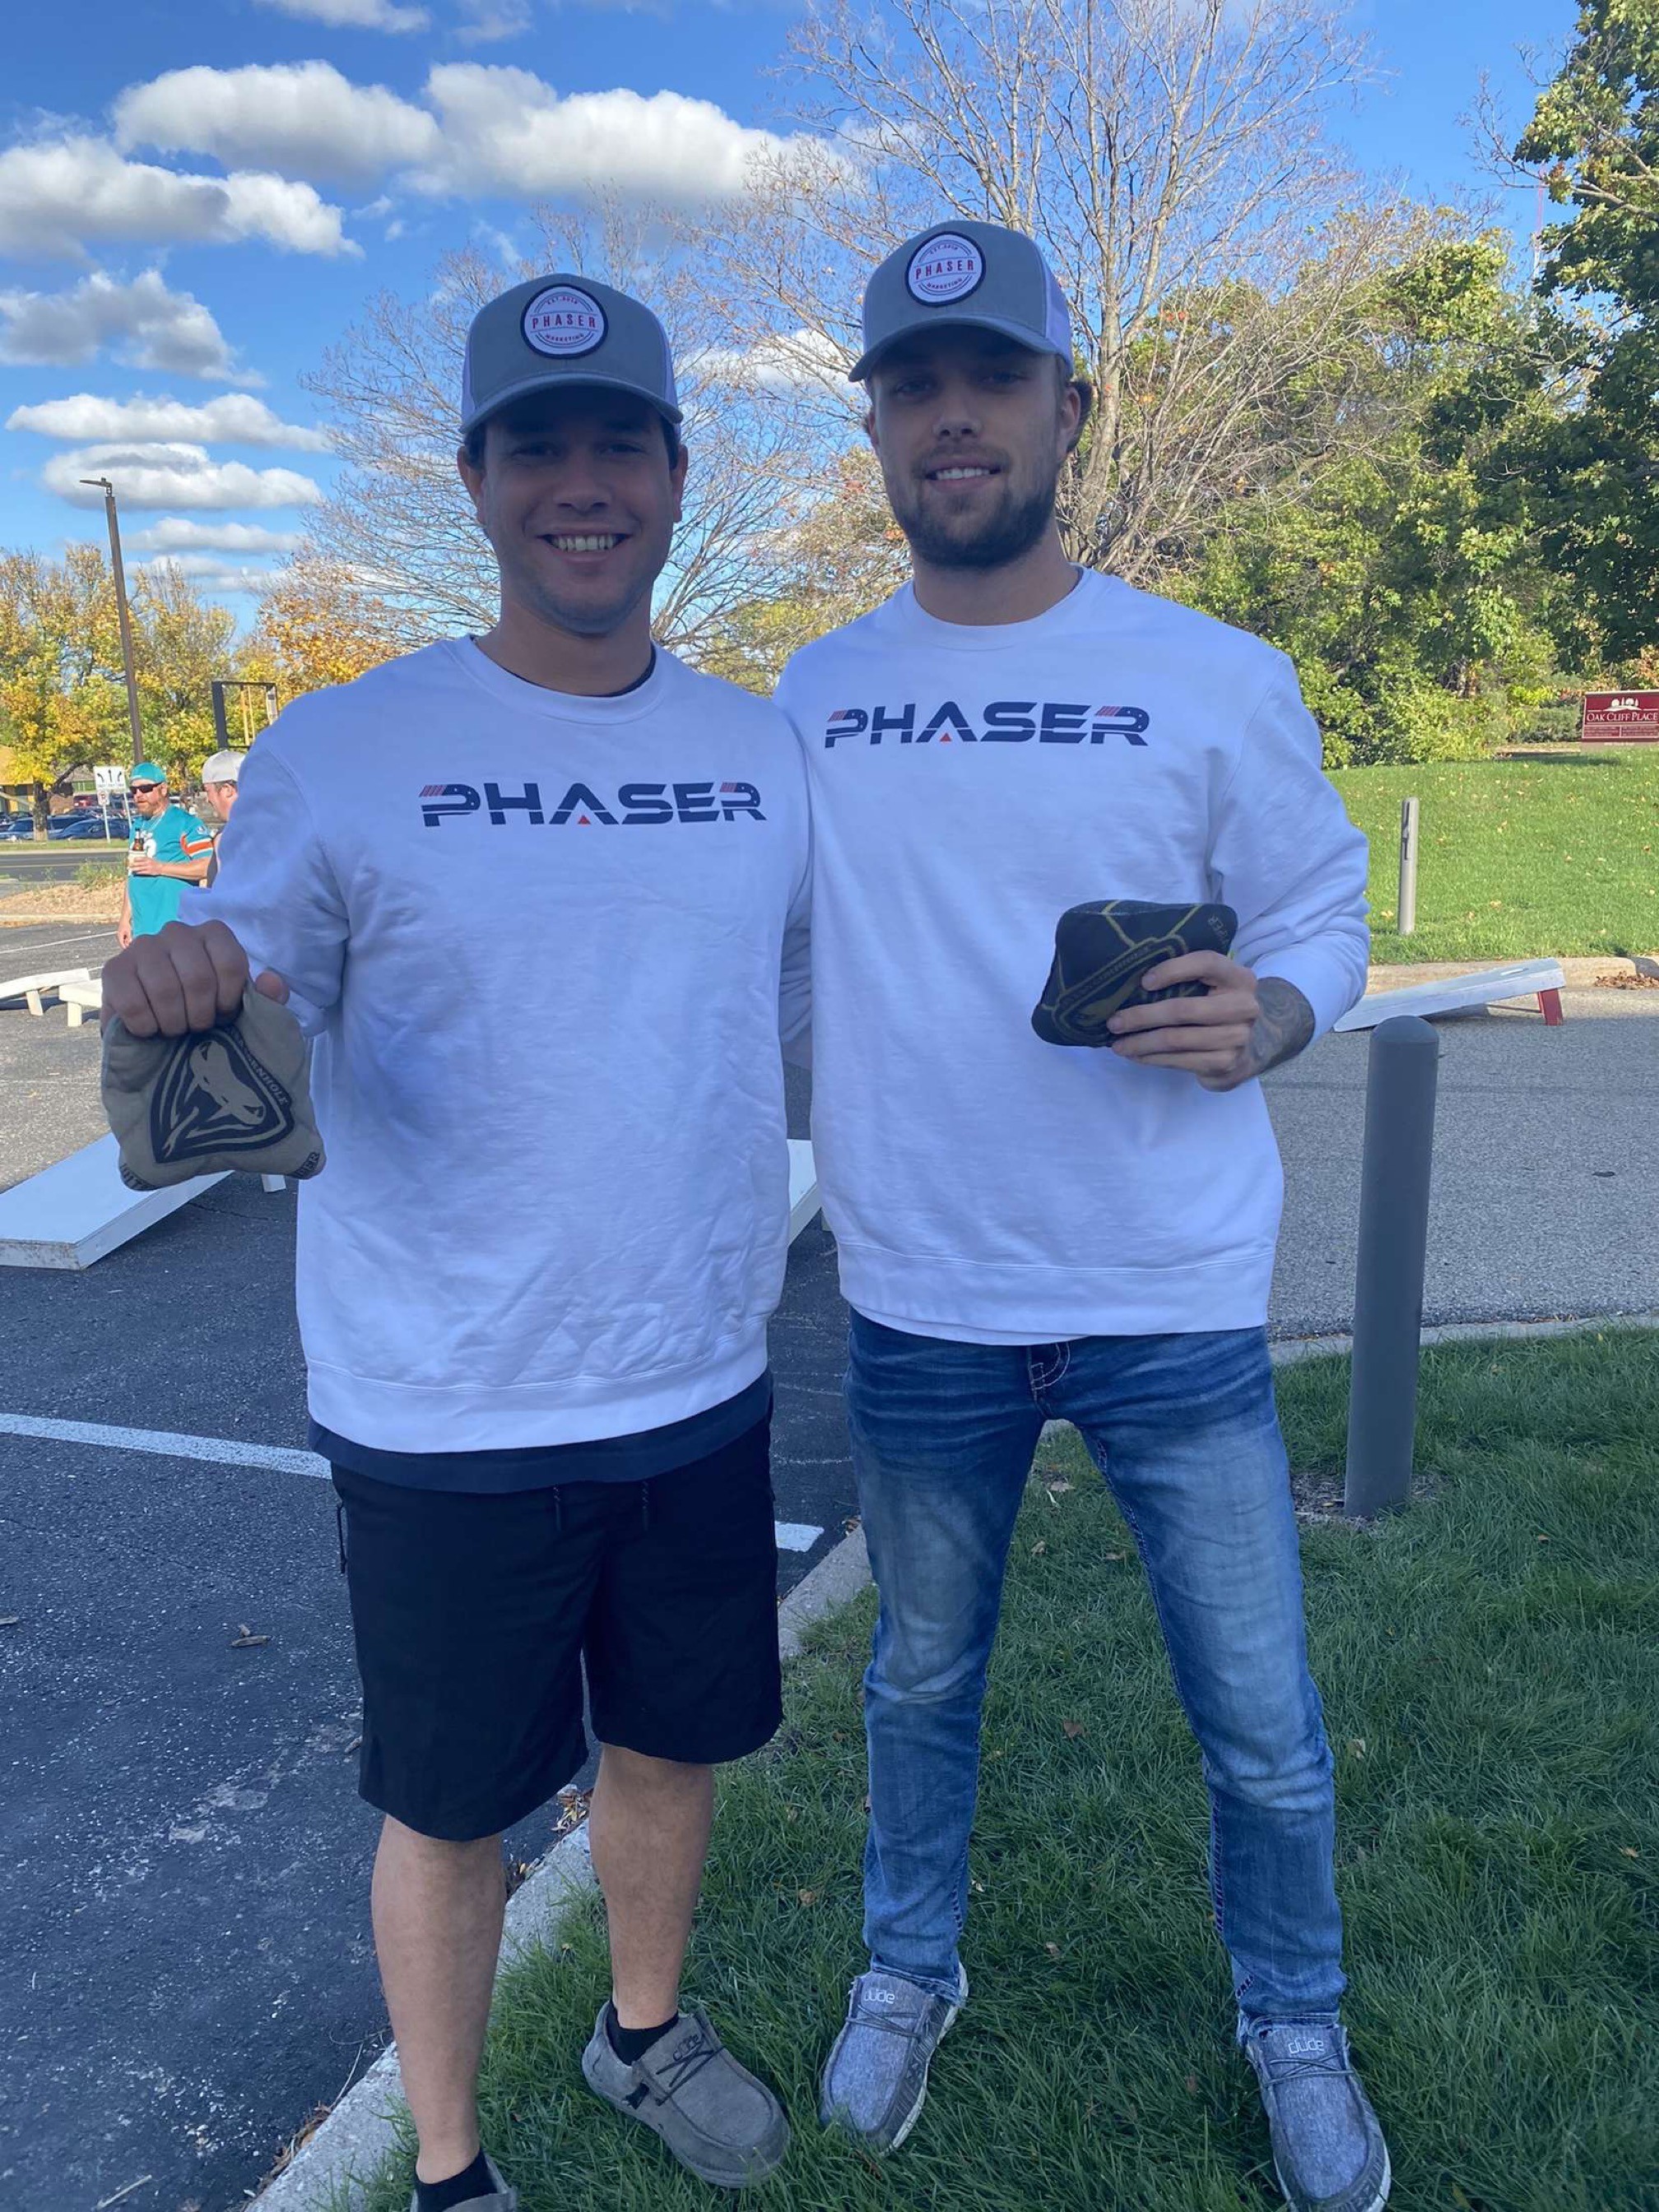 Justin and Ryan in a bags tournament repping Team Phaser